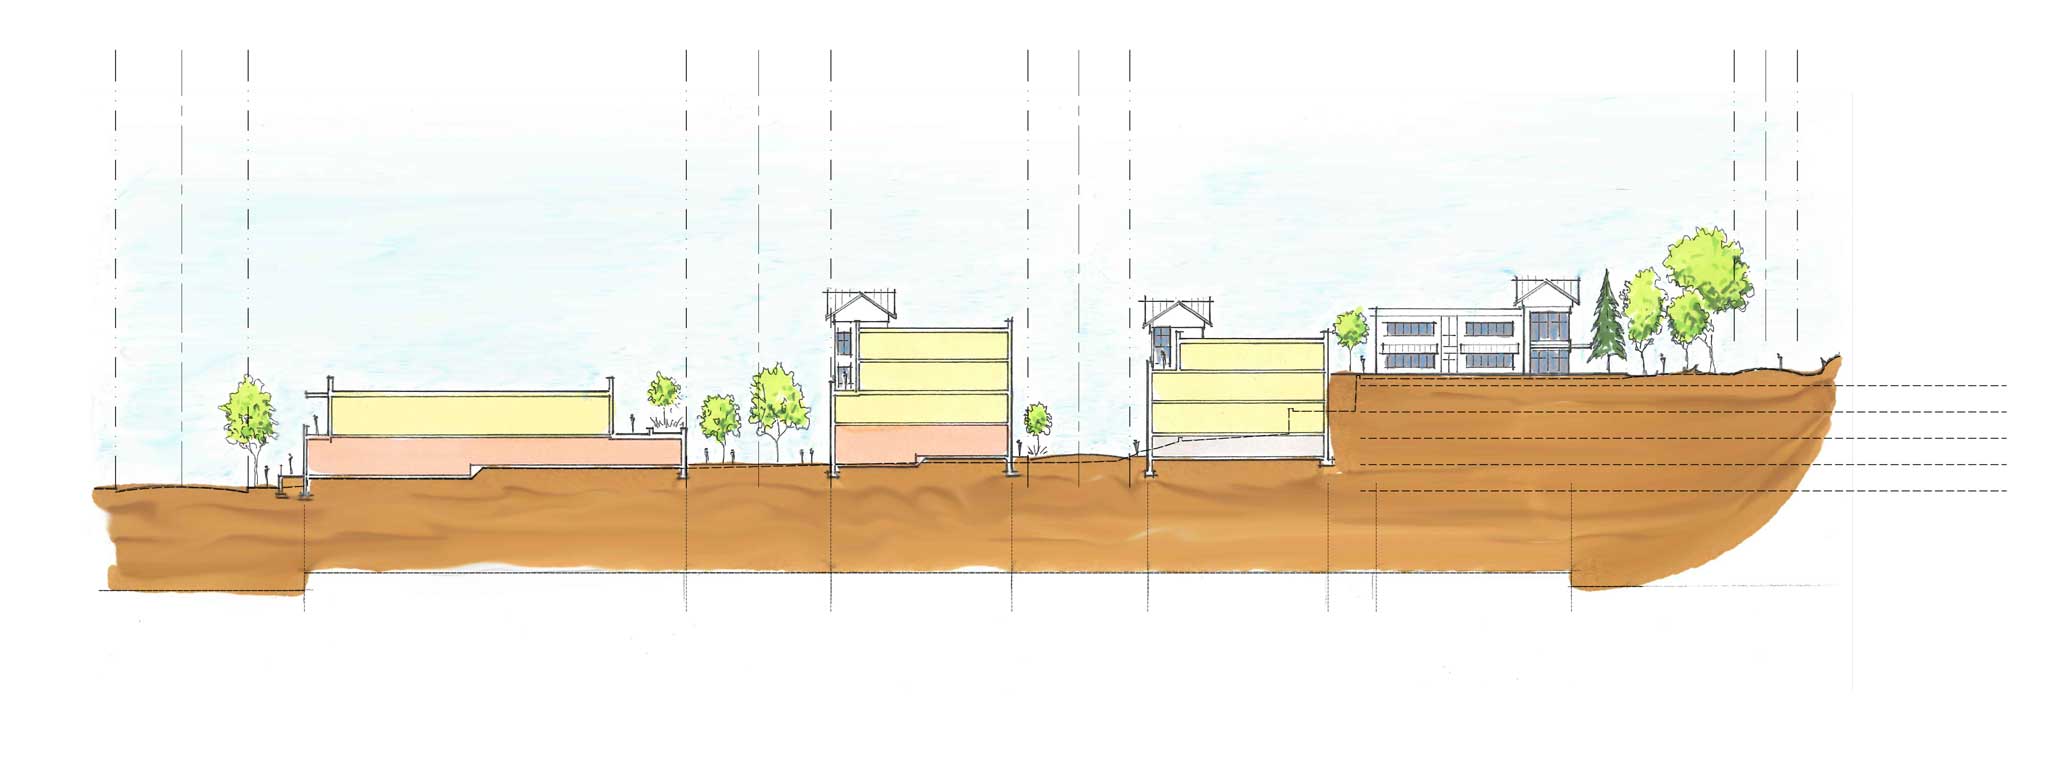 A hand drawing of the site's relationship to the built environment - using a site's existing topography as a design function is a sustainable design approach in brownfield redevelopment - In urban planning, brownfield land is any previously developed land that is not currently in use that may be potentially contaminated. The term is also used to describe land previously used for industrial or commercial purposes with known or suspected pollution including soil contamination due to hazardous waste.